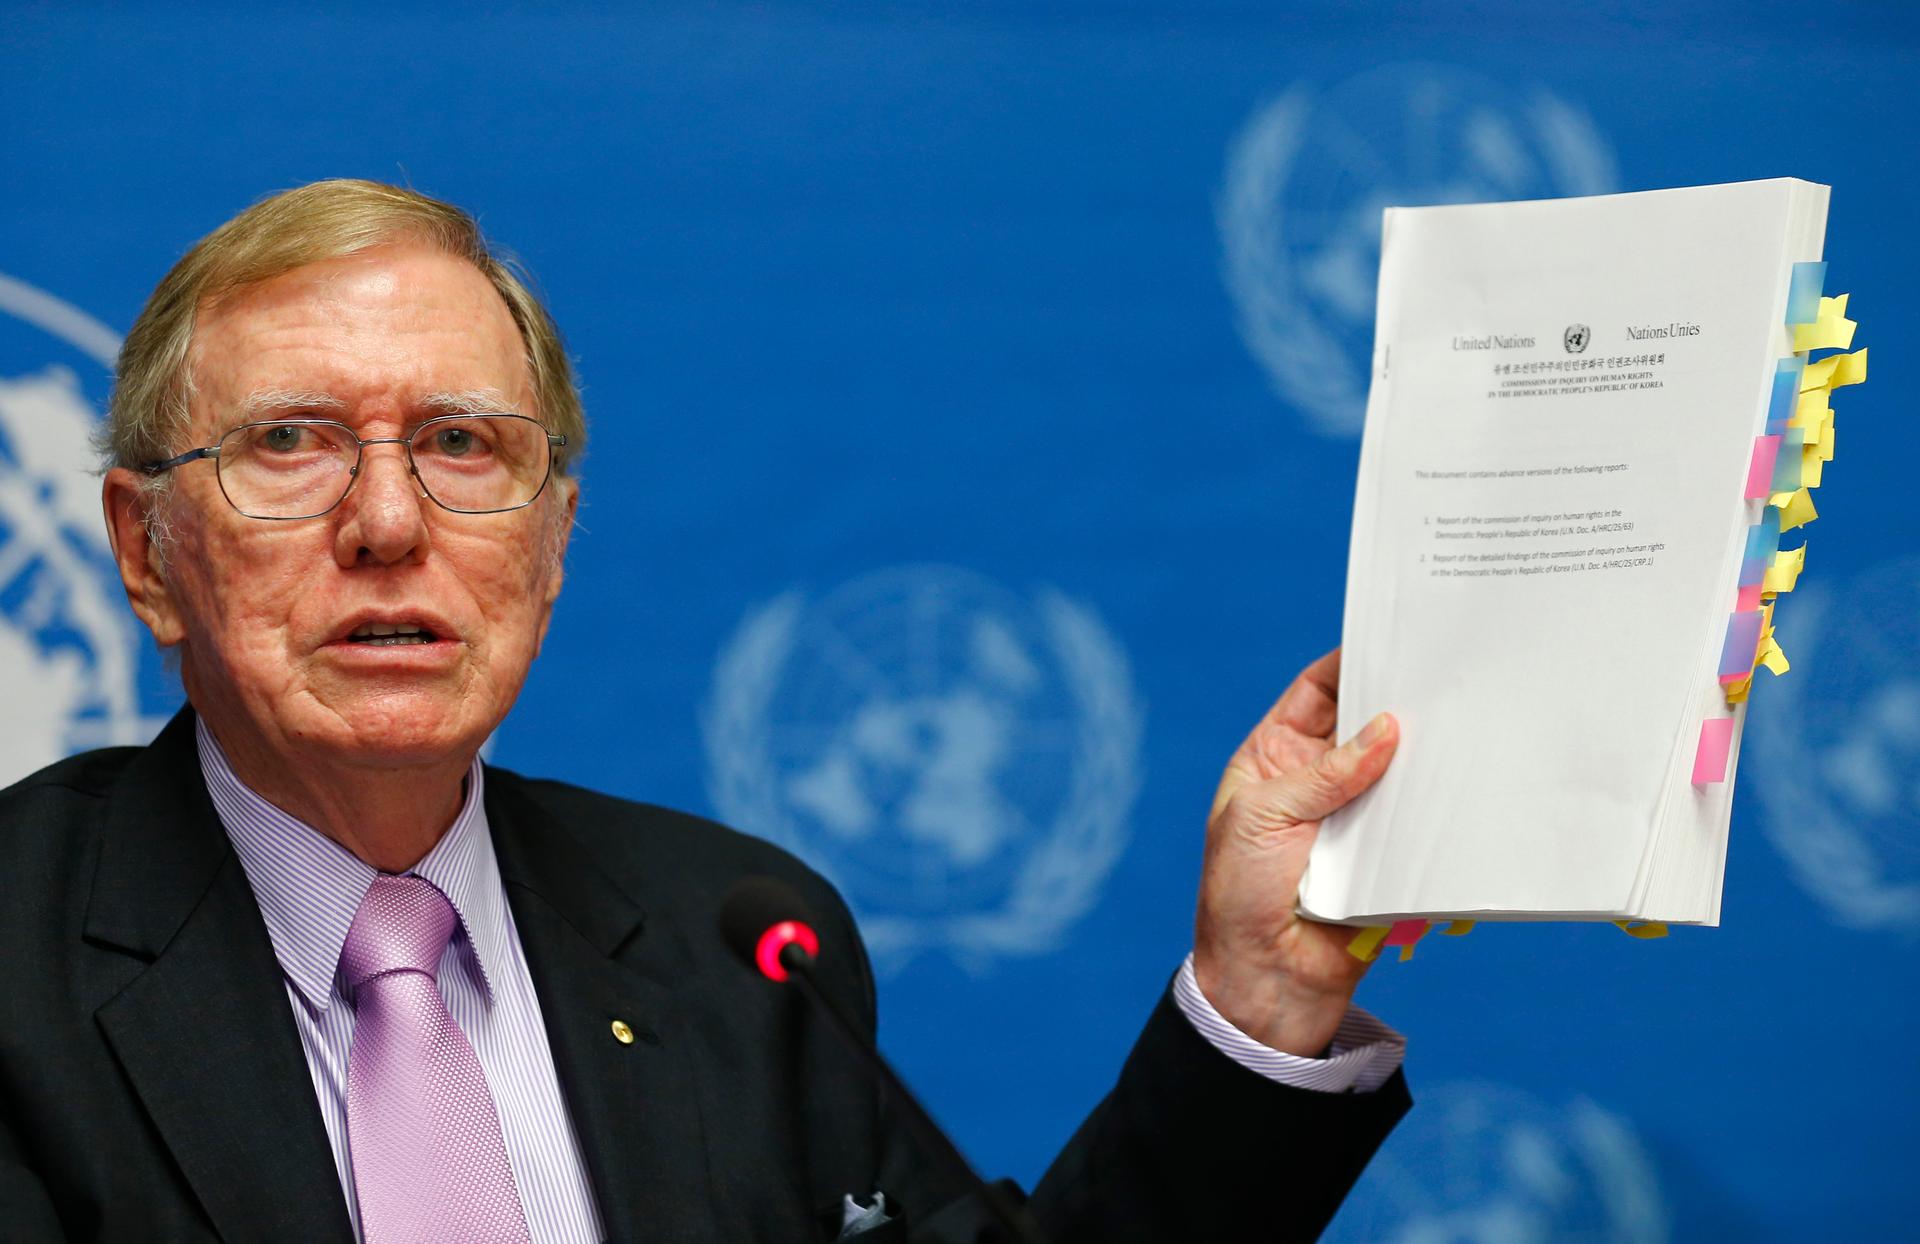 Michael Kirby, who helped lead the Commission of Inquiry on Human Rights in North Korea, holds a copy of his report during a news conference at the United Nations in February 2014.